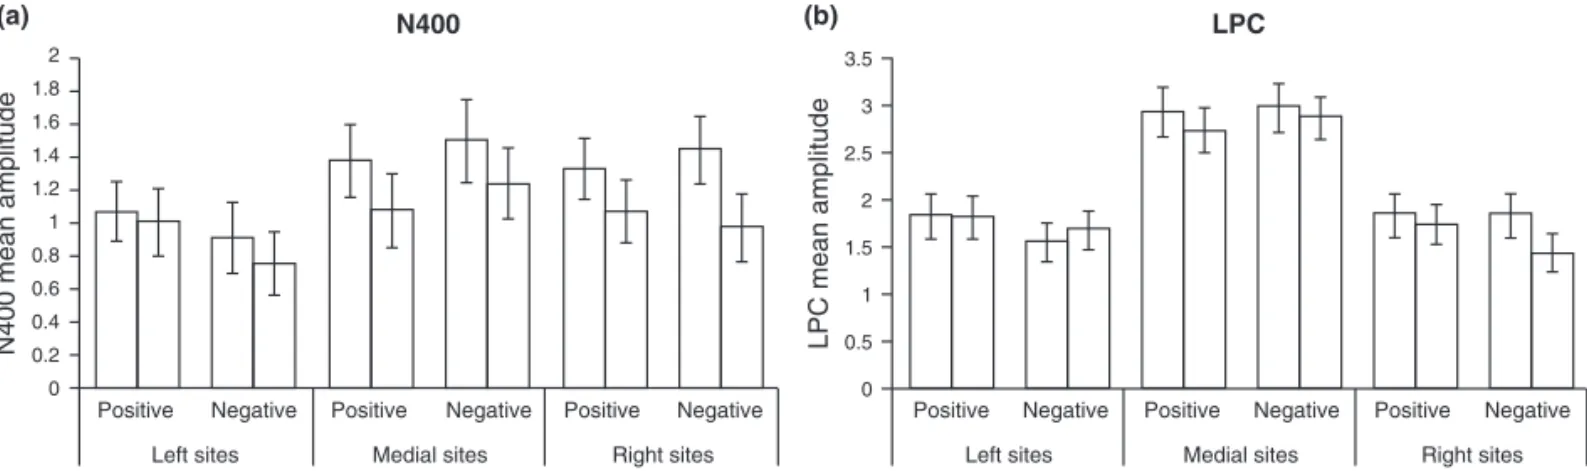 Figure 3. (a) N400 mean amplitude and (b) late positive component (LPC) mean amplitude at left, medial and right sites as a function of type of Emotional valence (positive or negative sentences) and Congruency (congruent or incongruent)